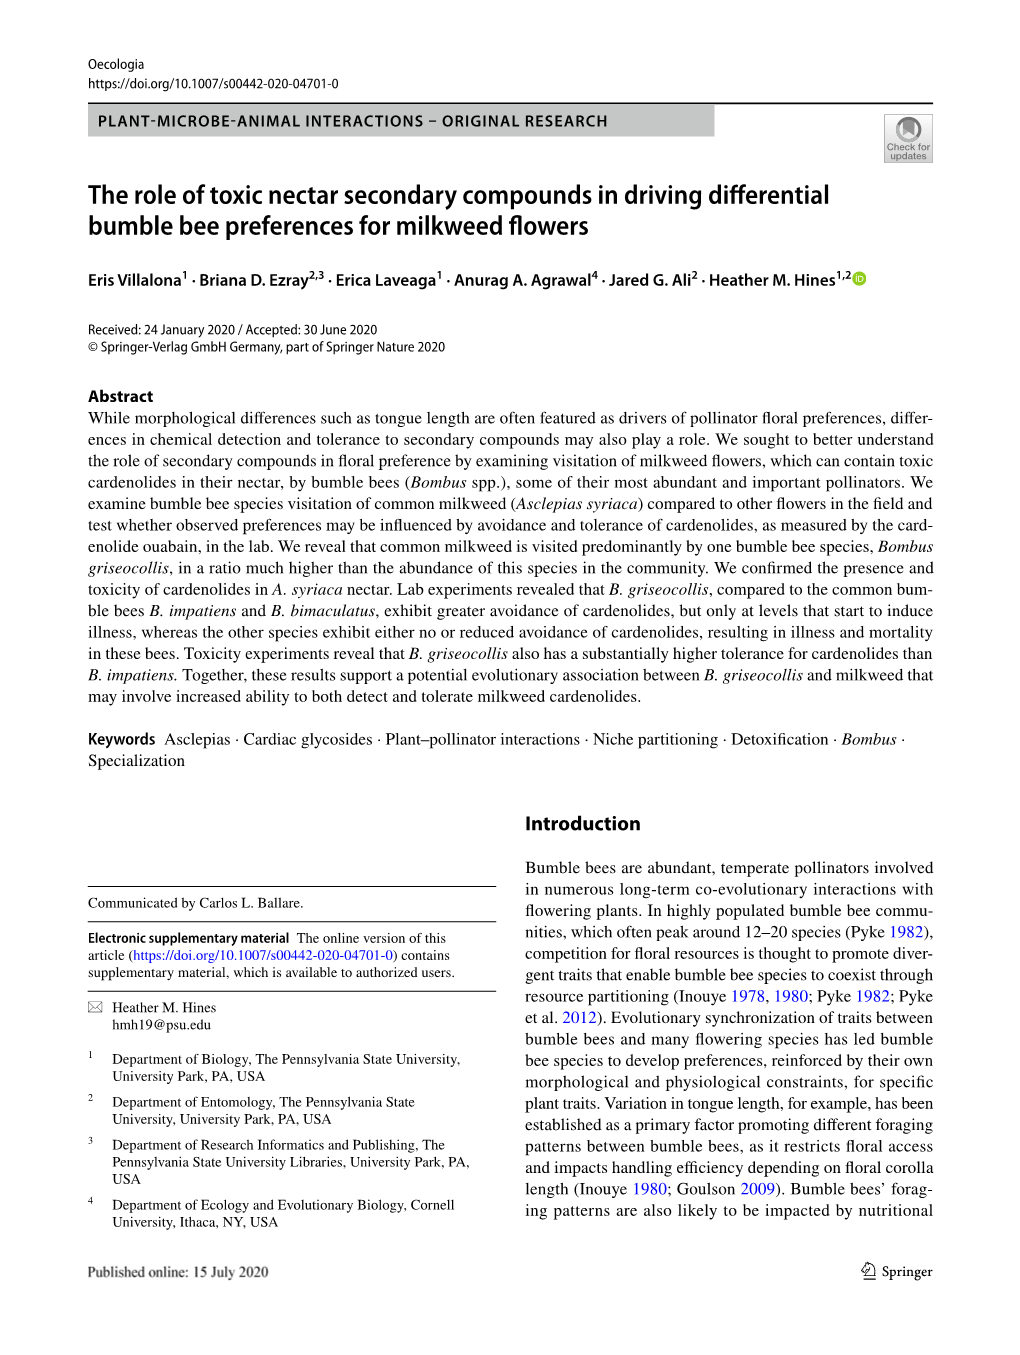 The Role of Toxic Nectar Secondary Compounds in Driving Differential